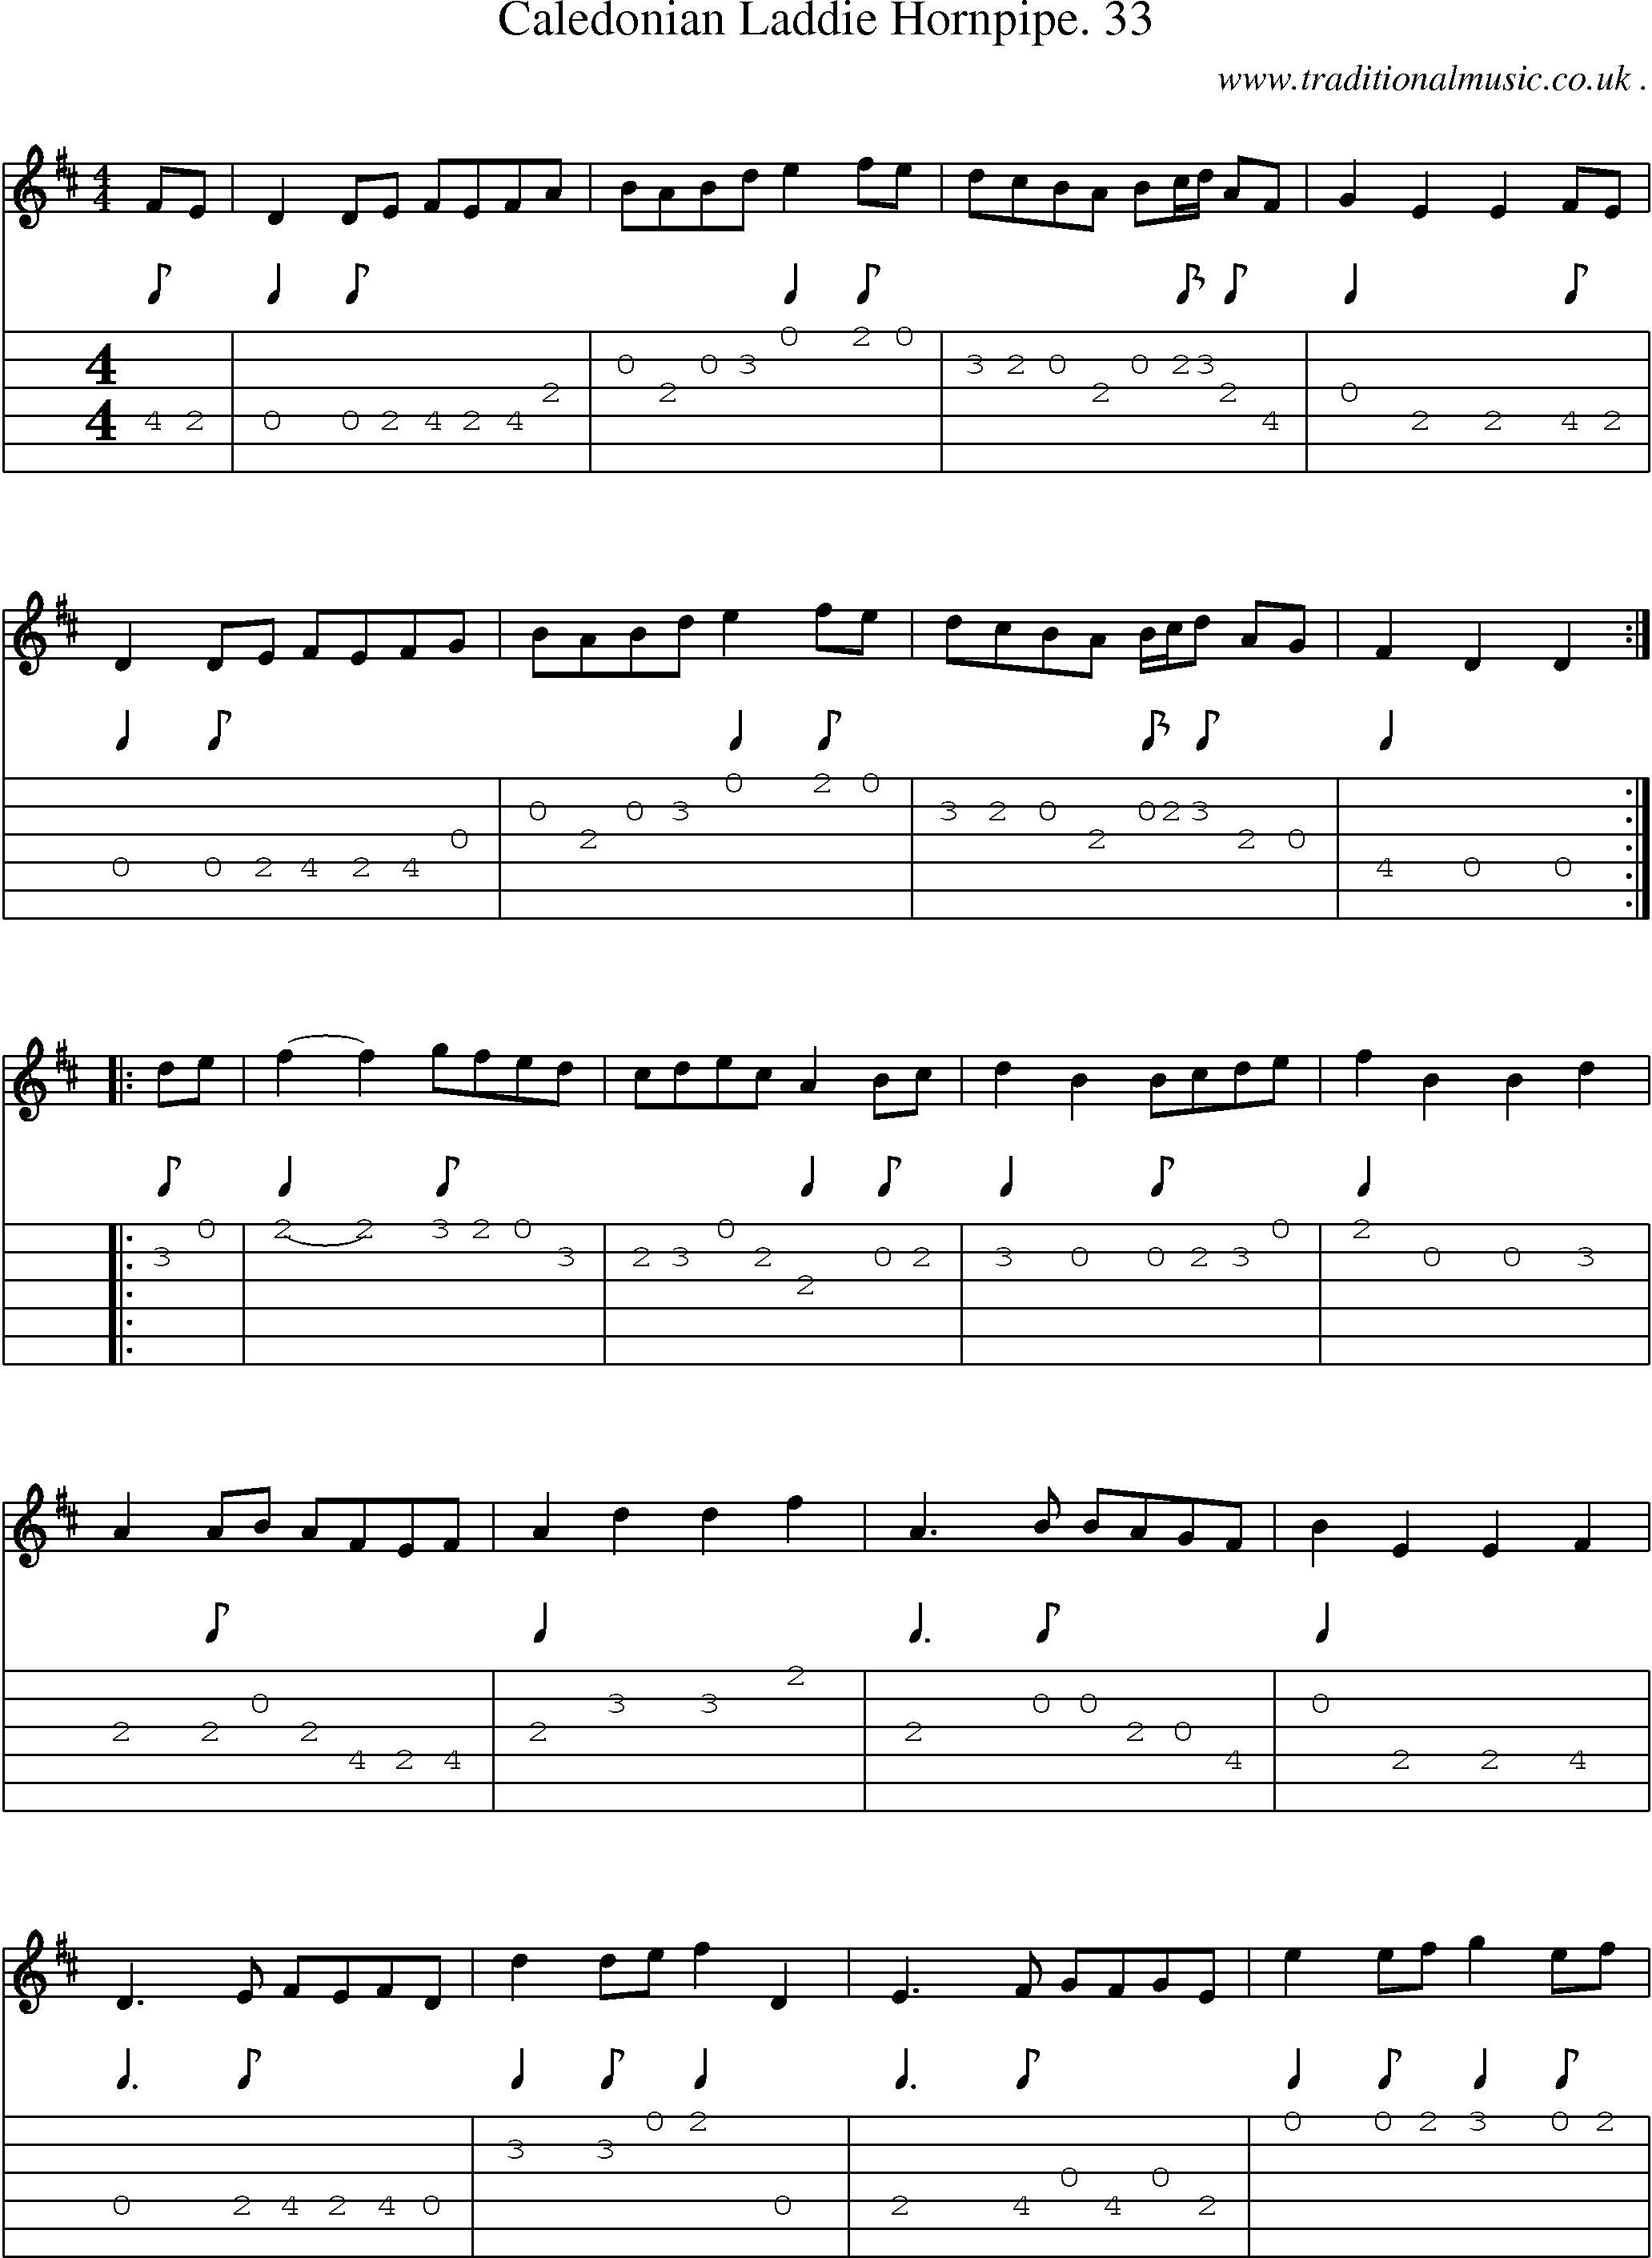 Sheet-Music and Guitar Tabs for Caledonian Laddie Hornpipe 33